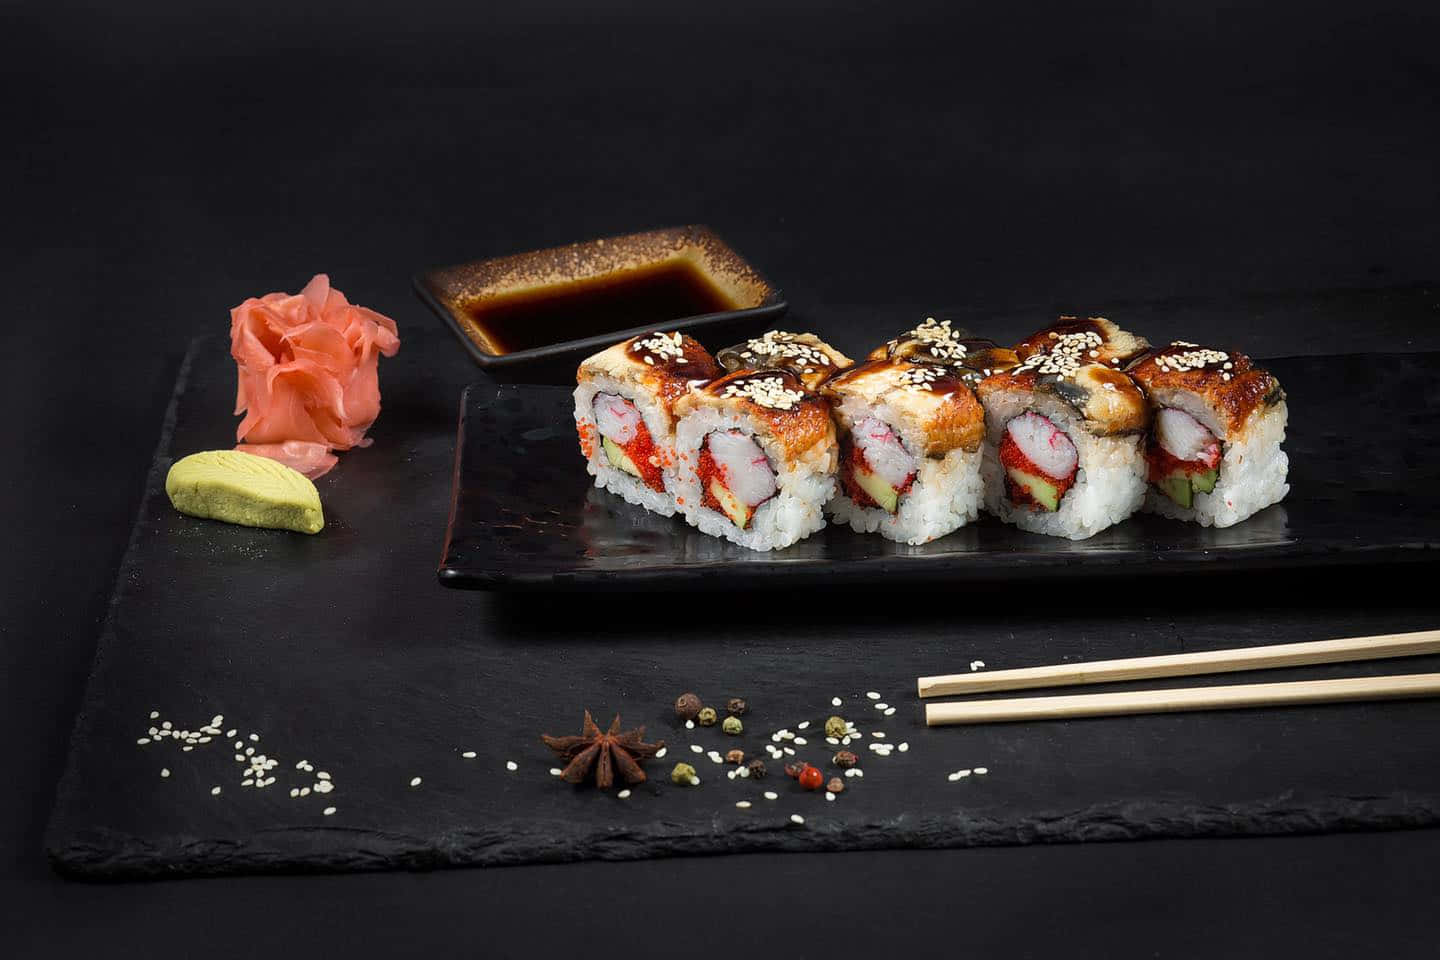 An appetizing array of sushi delights